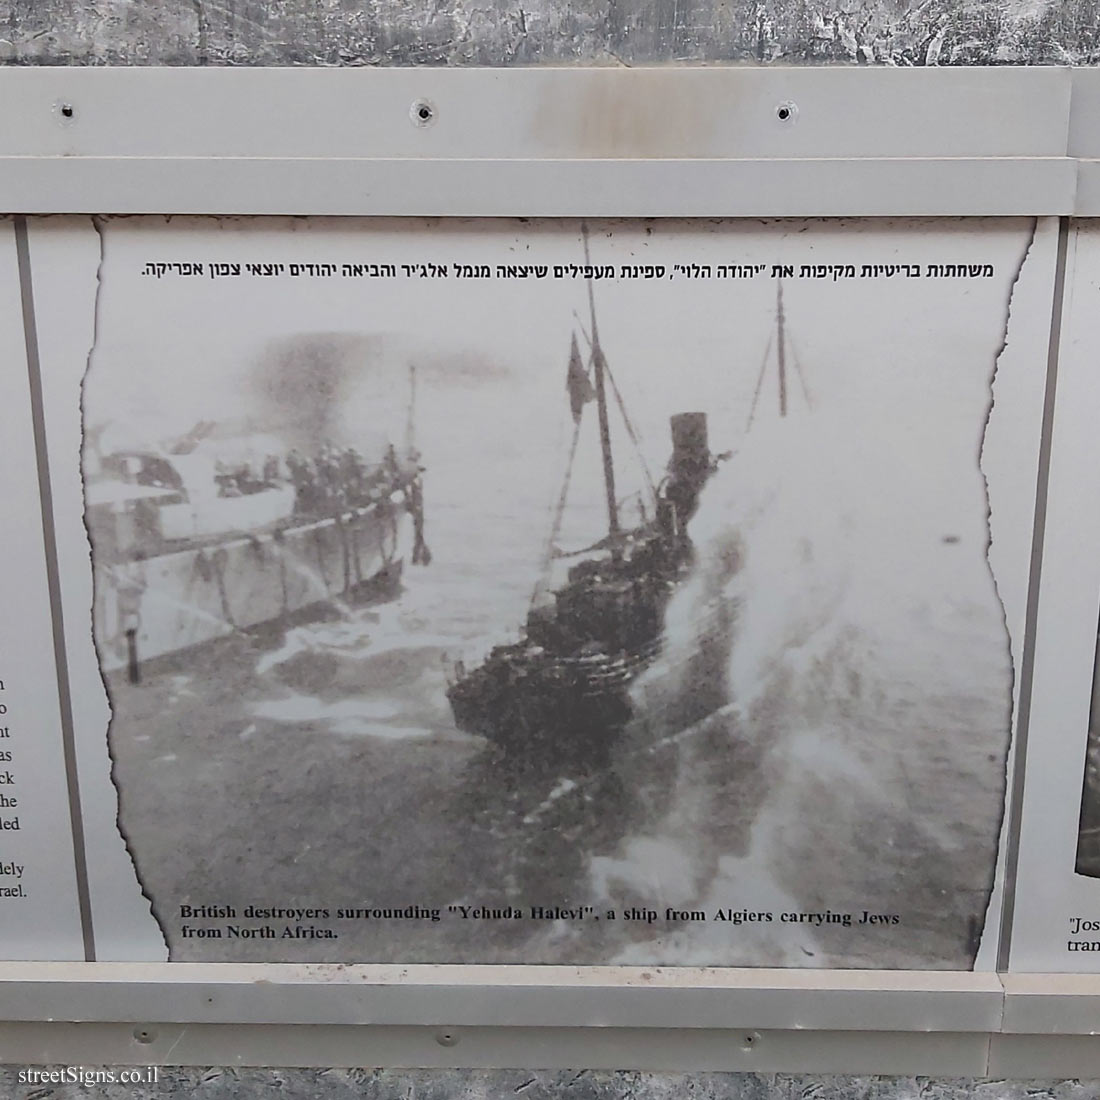 Tel Aviv - London Garden - The story of the illegal immigration - The ship "Yehuda Halevi"